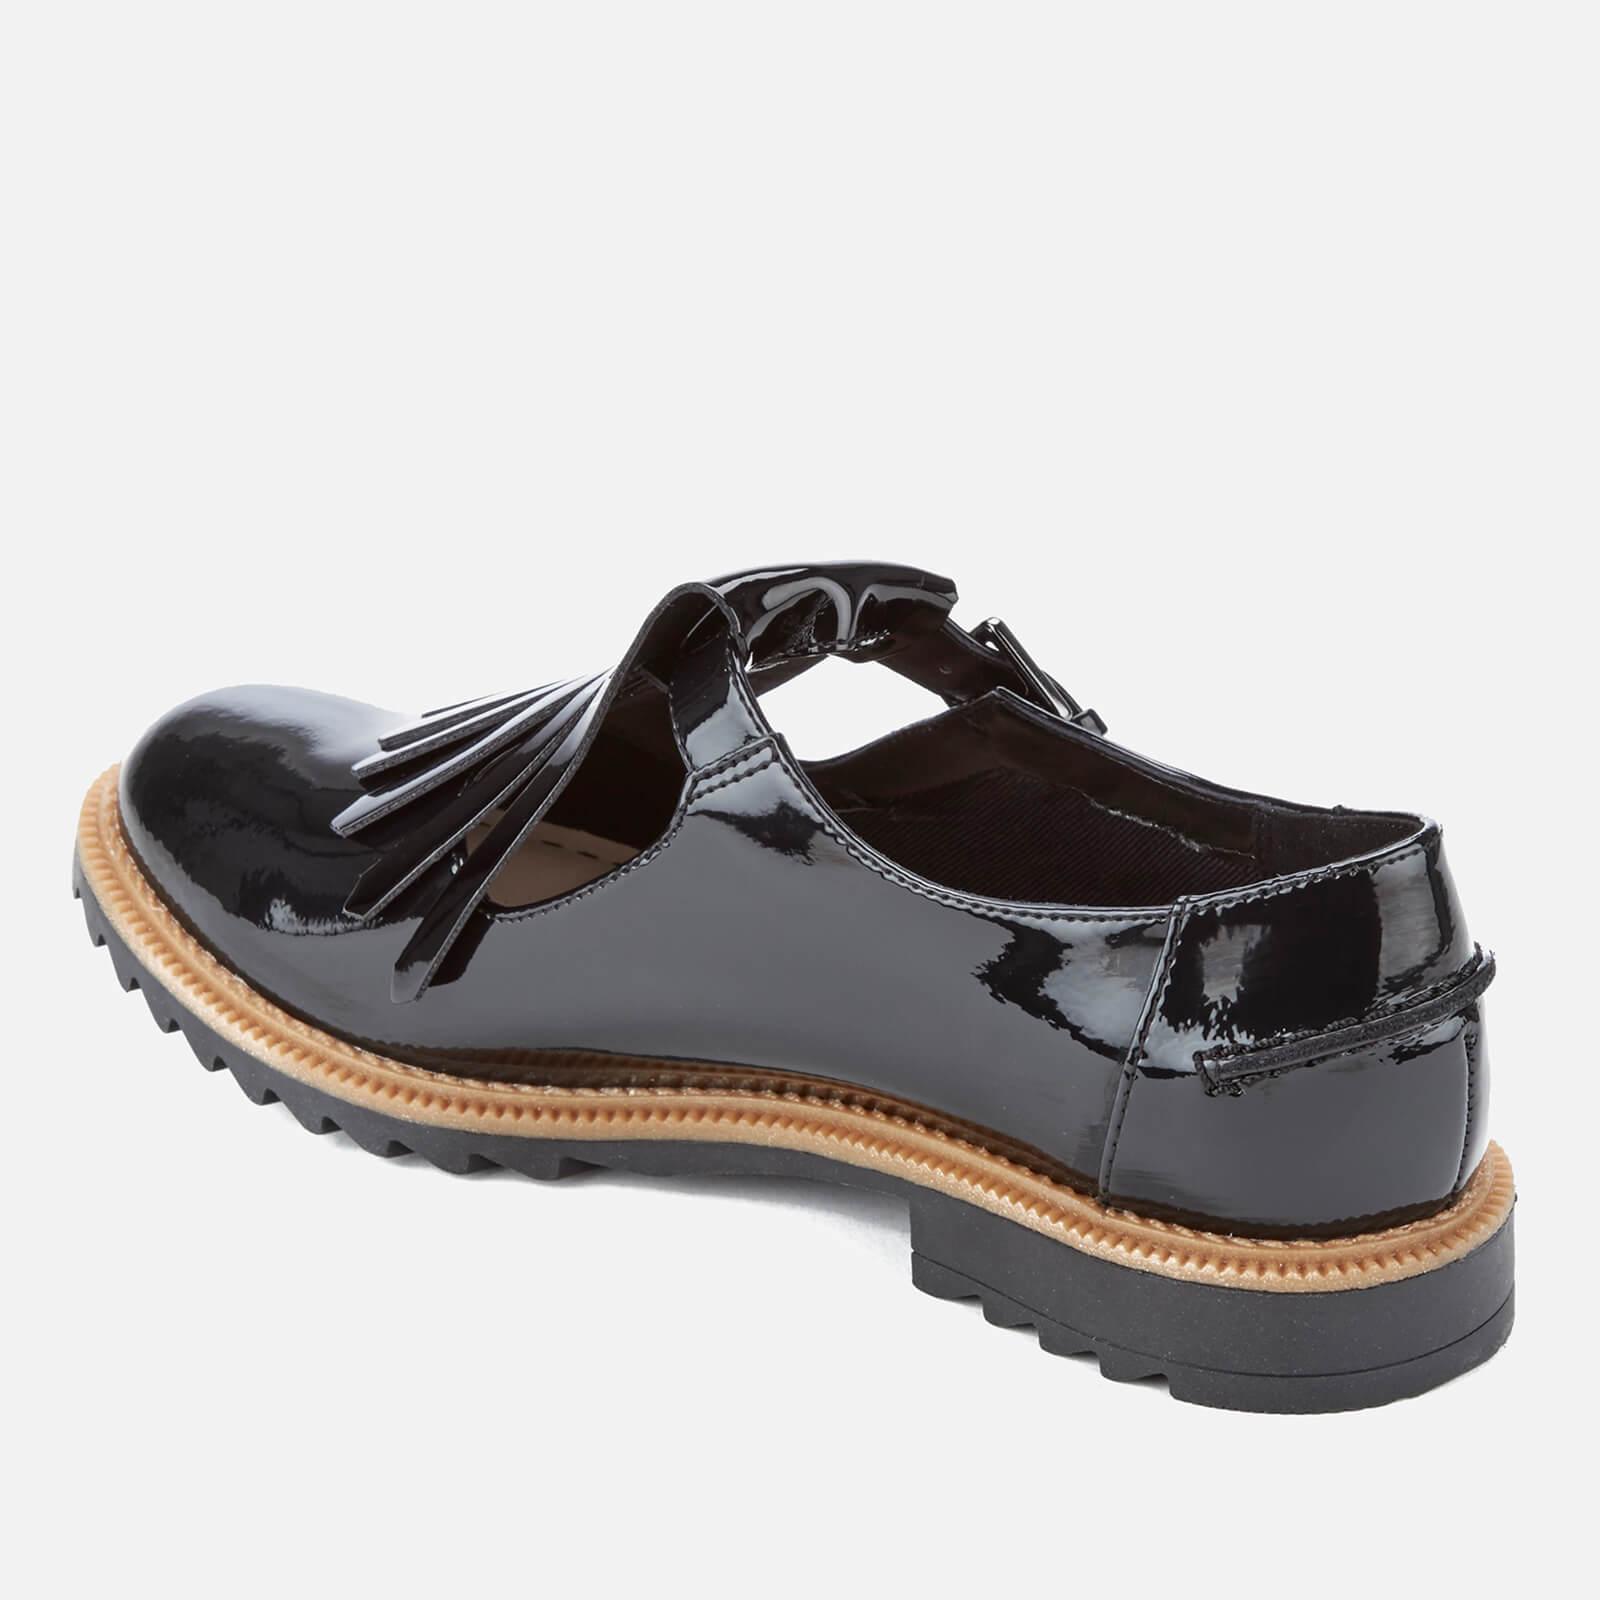 clarks griffin mia wide fit